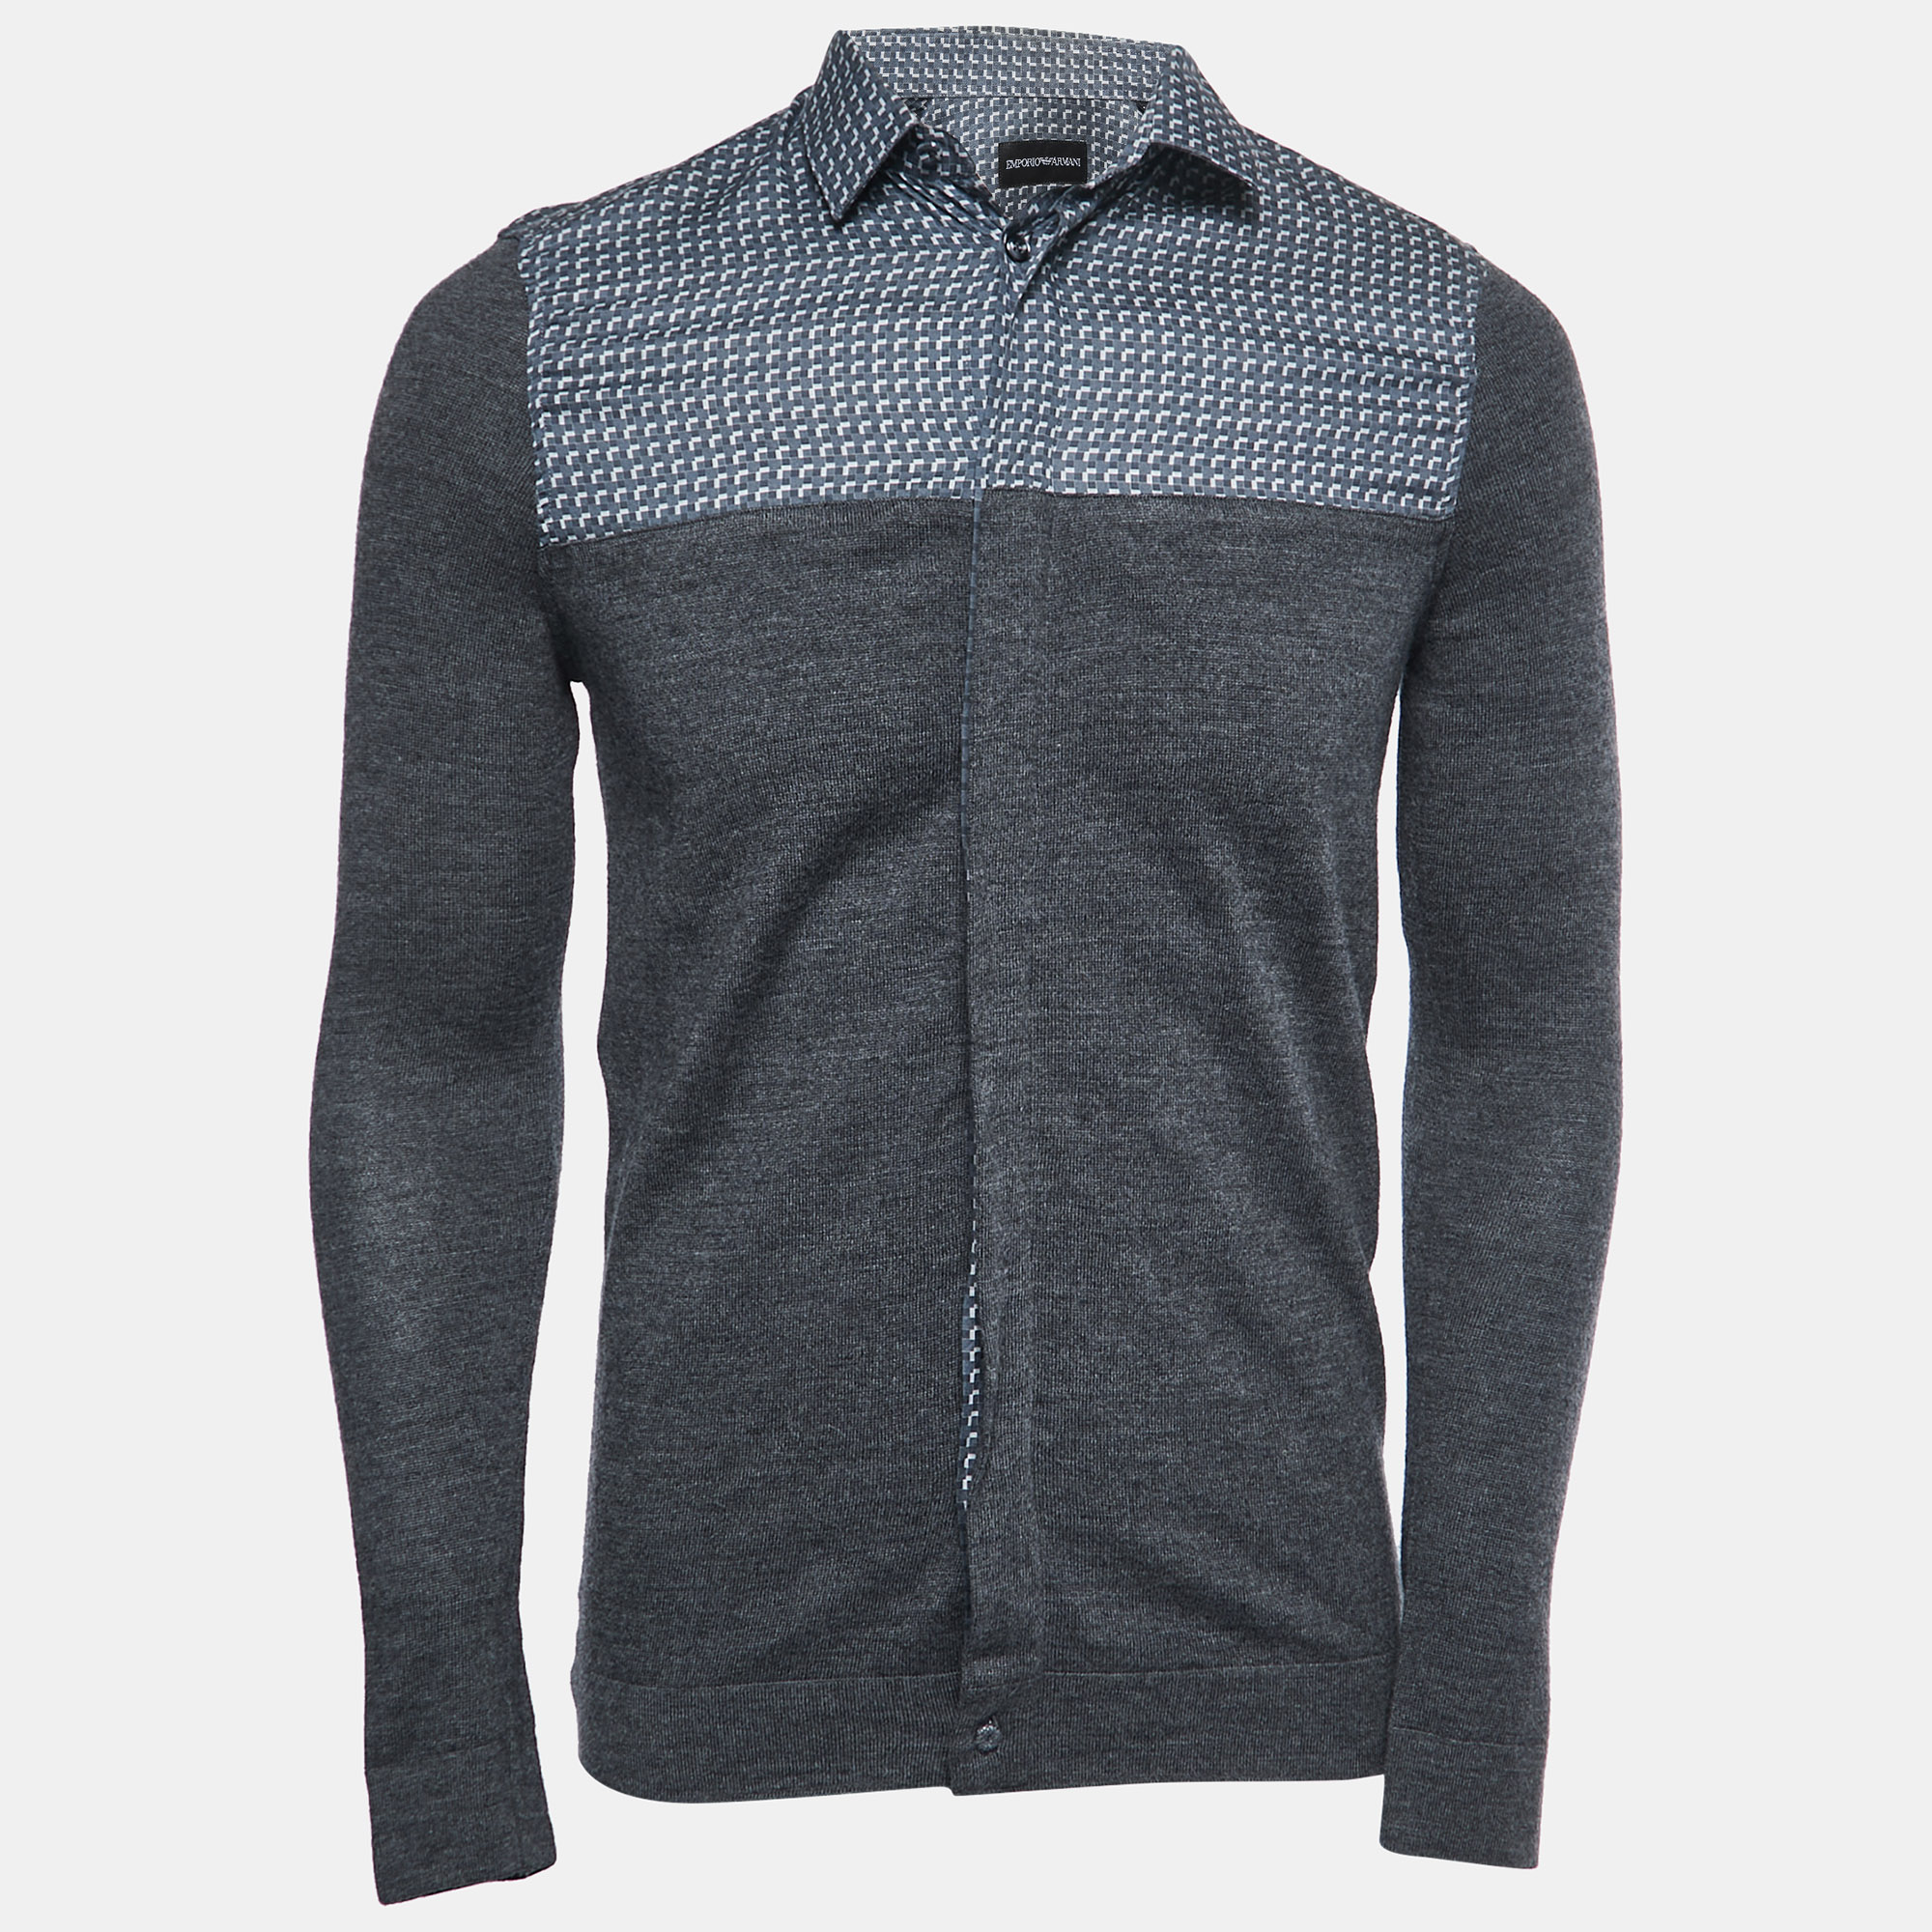 

Emporio Armani Grey Patterned Cotton and Wool Knit Full Sleeve Shirt